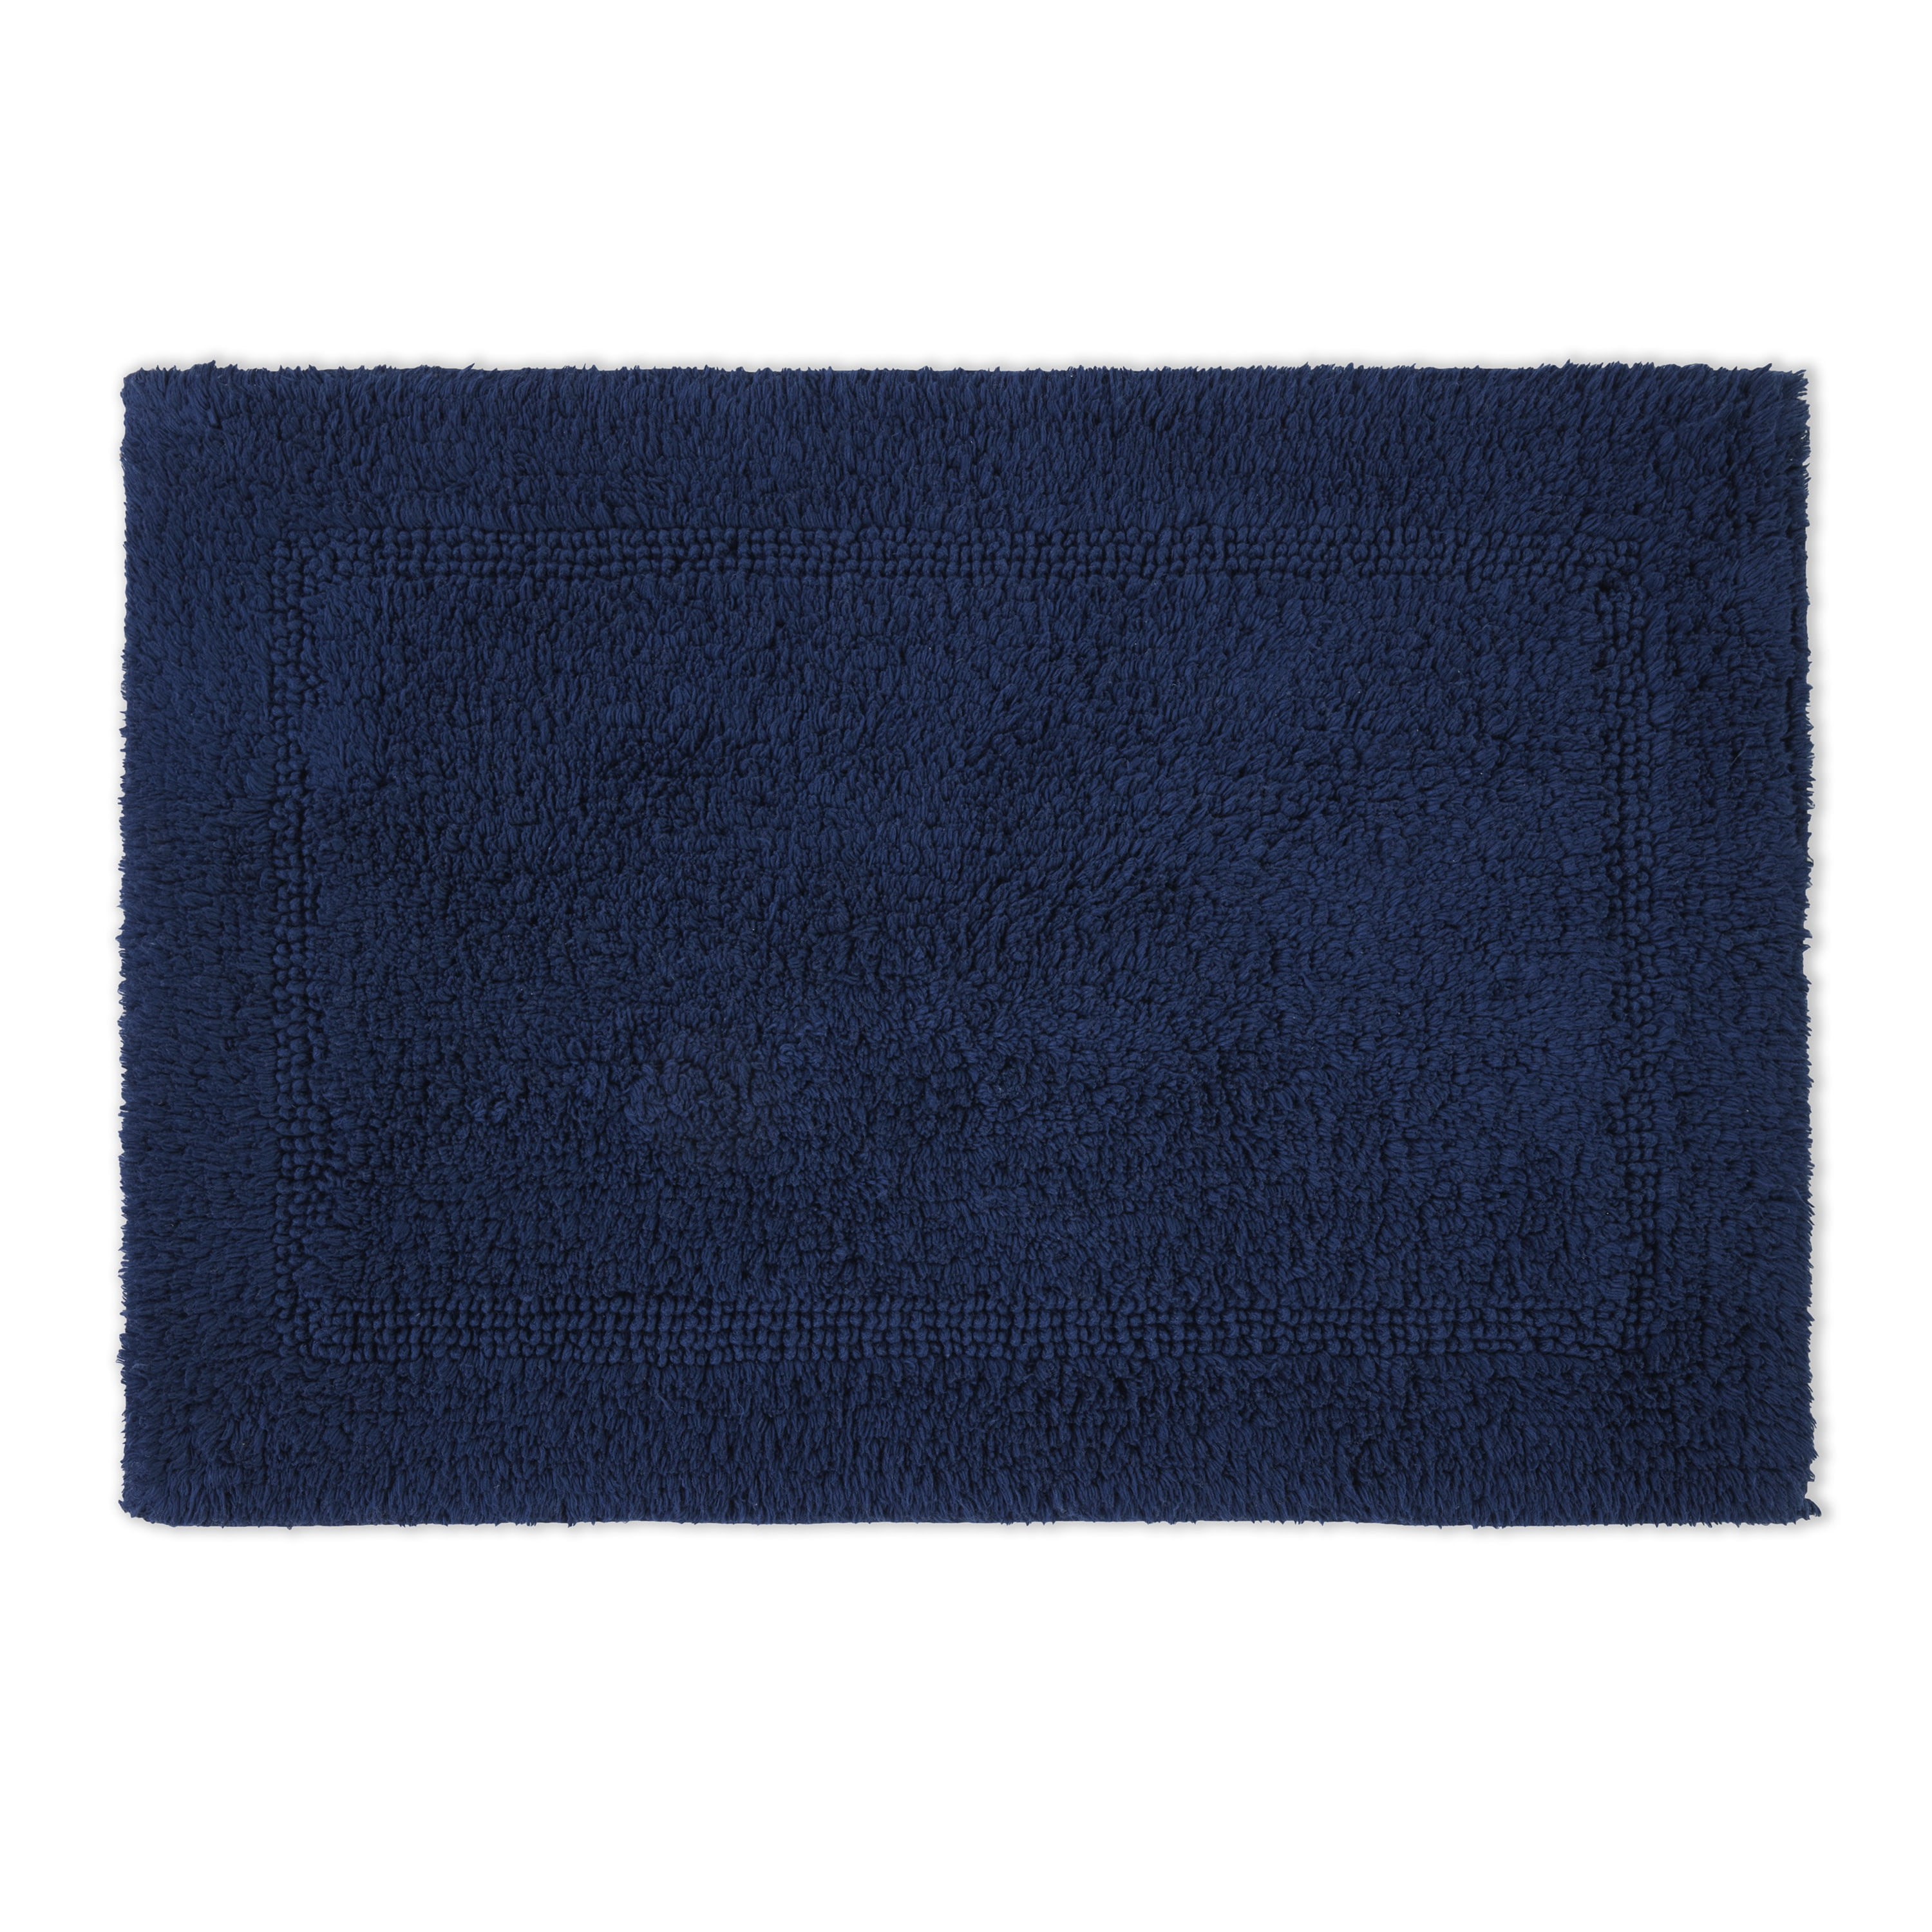 Better Homes & Gardens Bath Rug Cotton Reversible Washable, 17" x 24", Blue Admiral